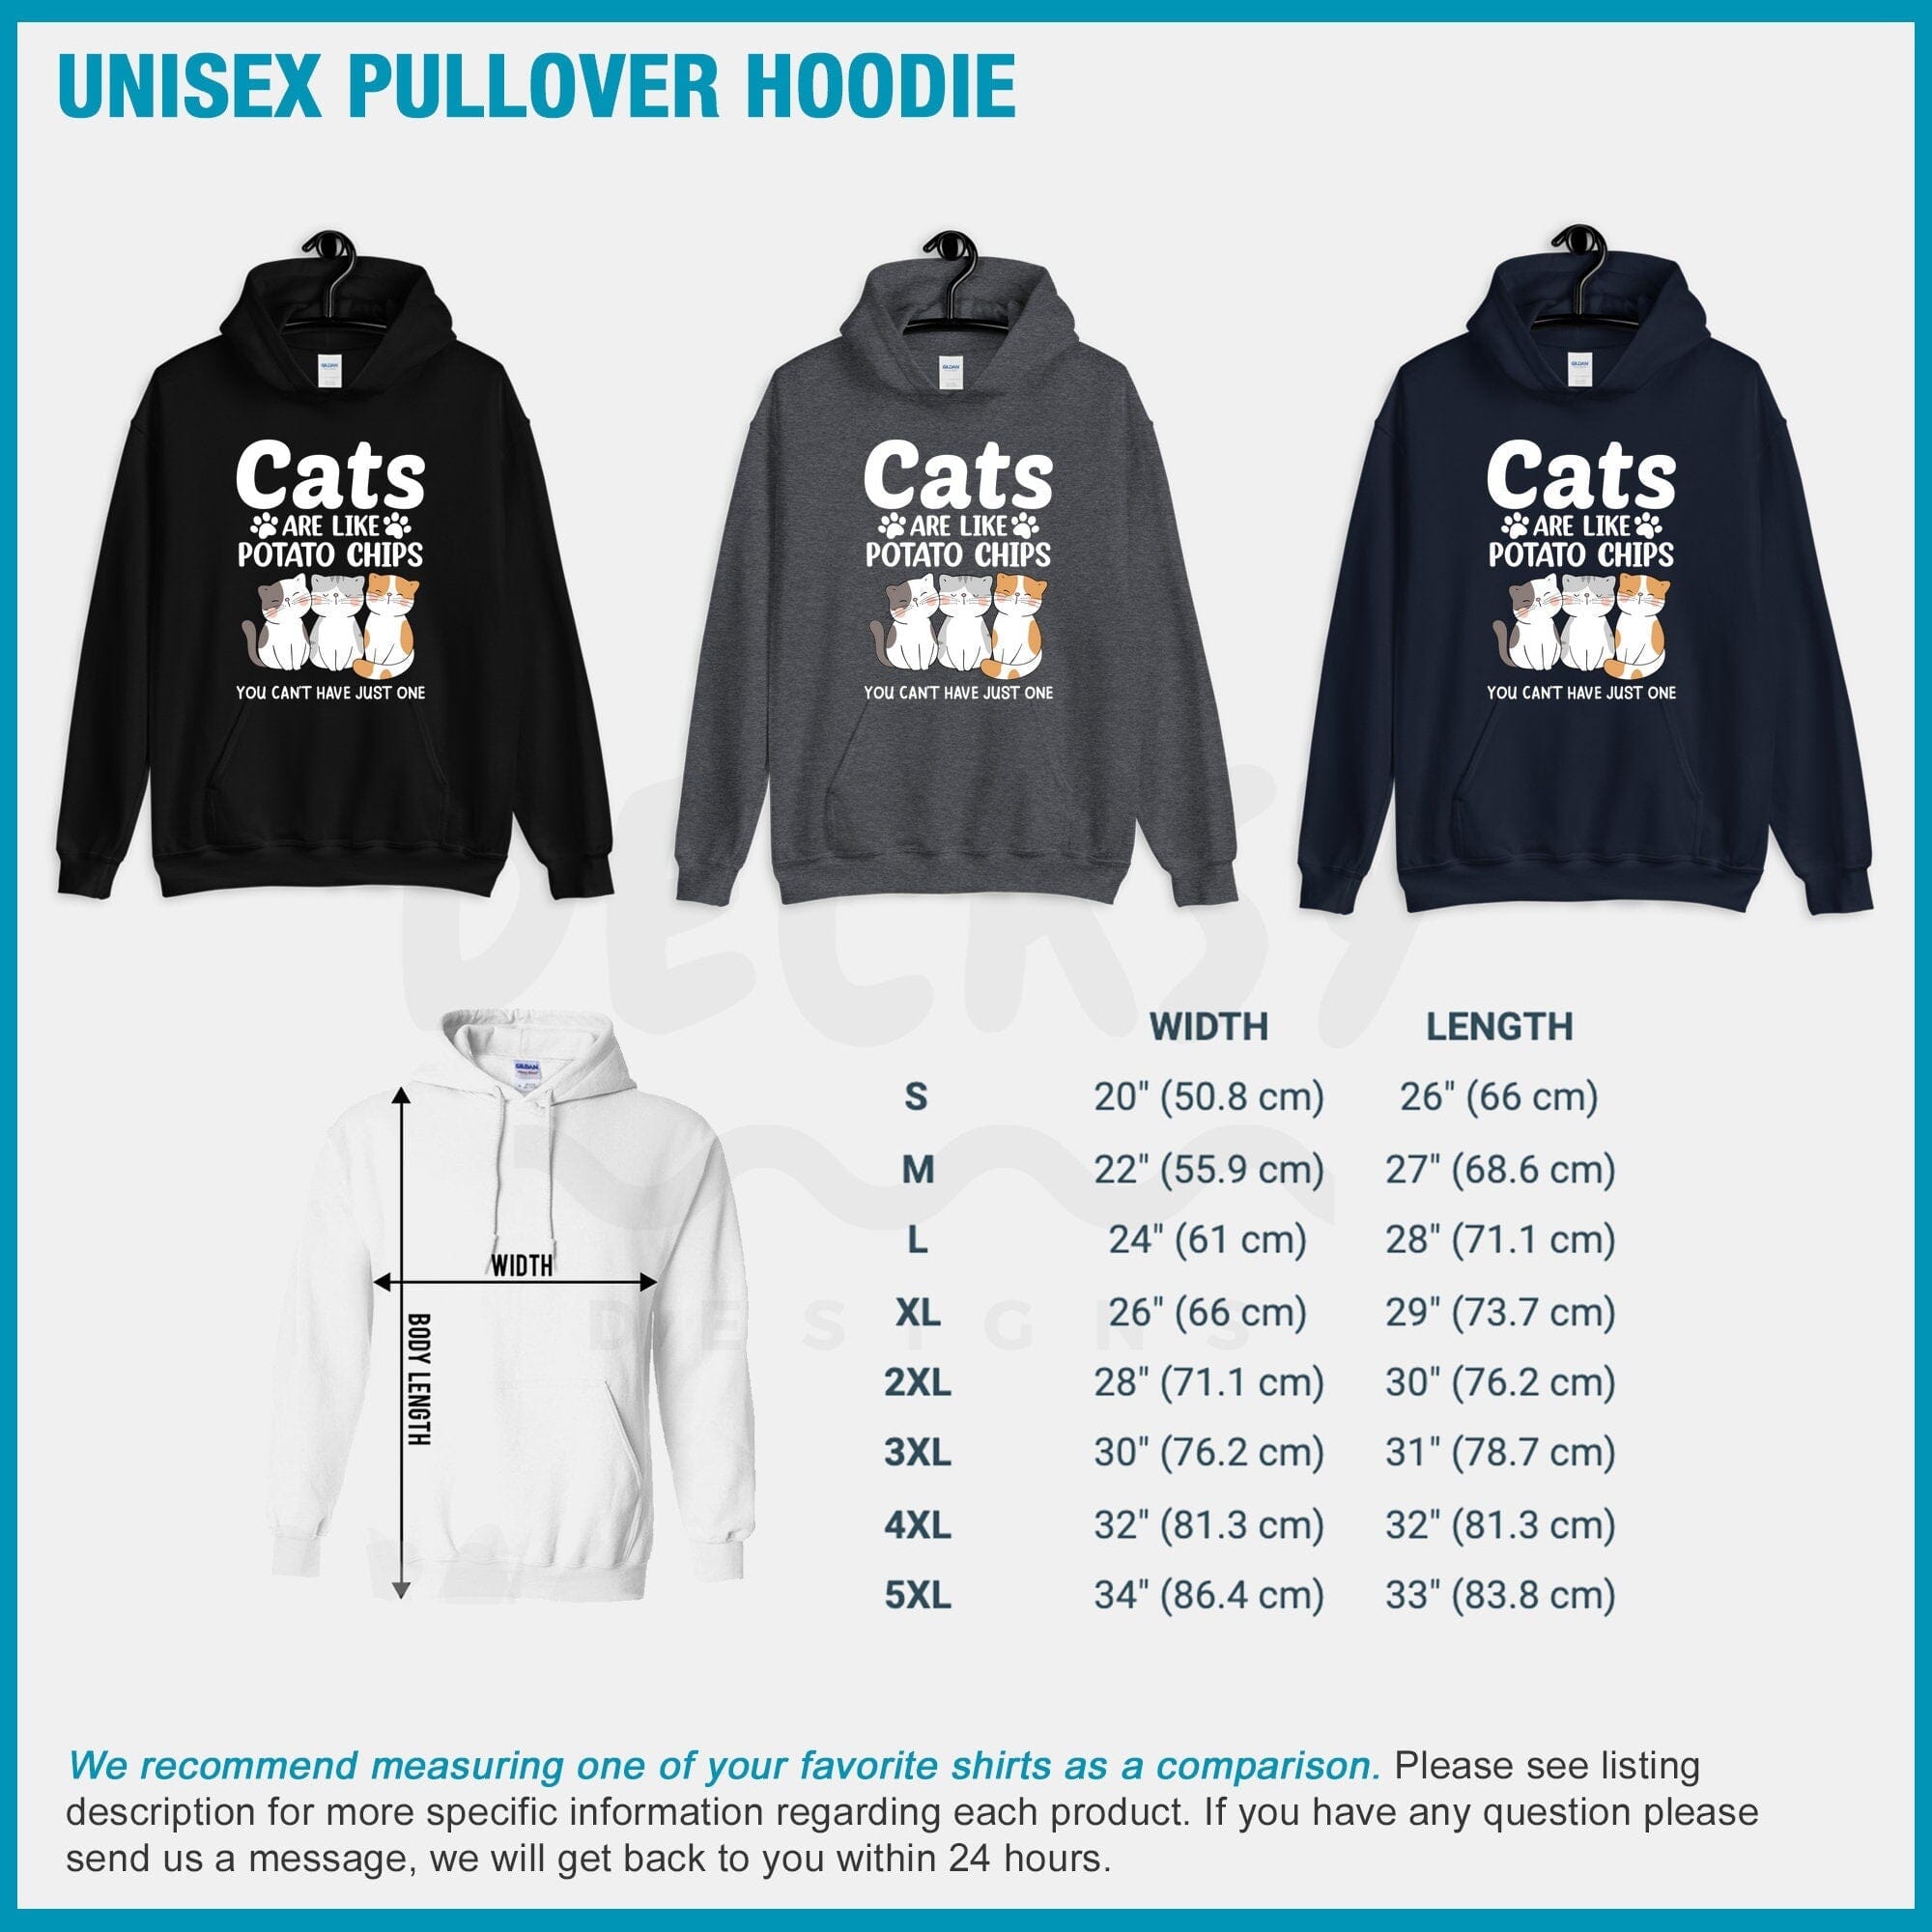 Cat Owner Tshirt, Gift For Cat Lover, Cat Mom And Dad Sweatshirt Hoodie-Clothing:Gender-Neutral Adult Clothing:Tops & Tees:T-shirts:Graphic Tees-DecksyDesigns